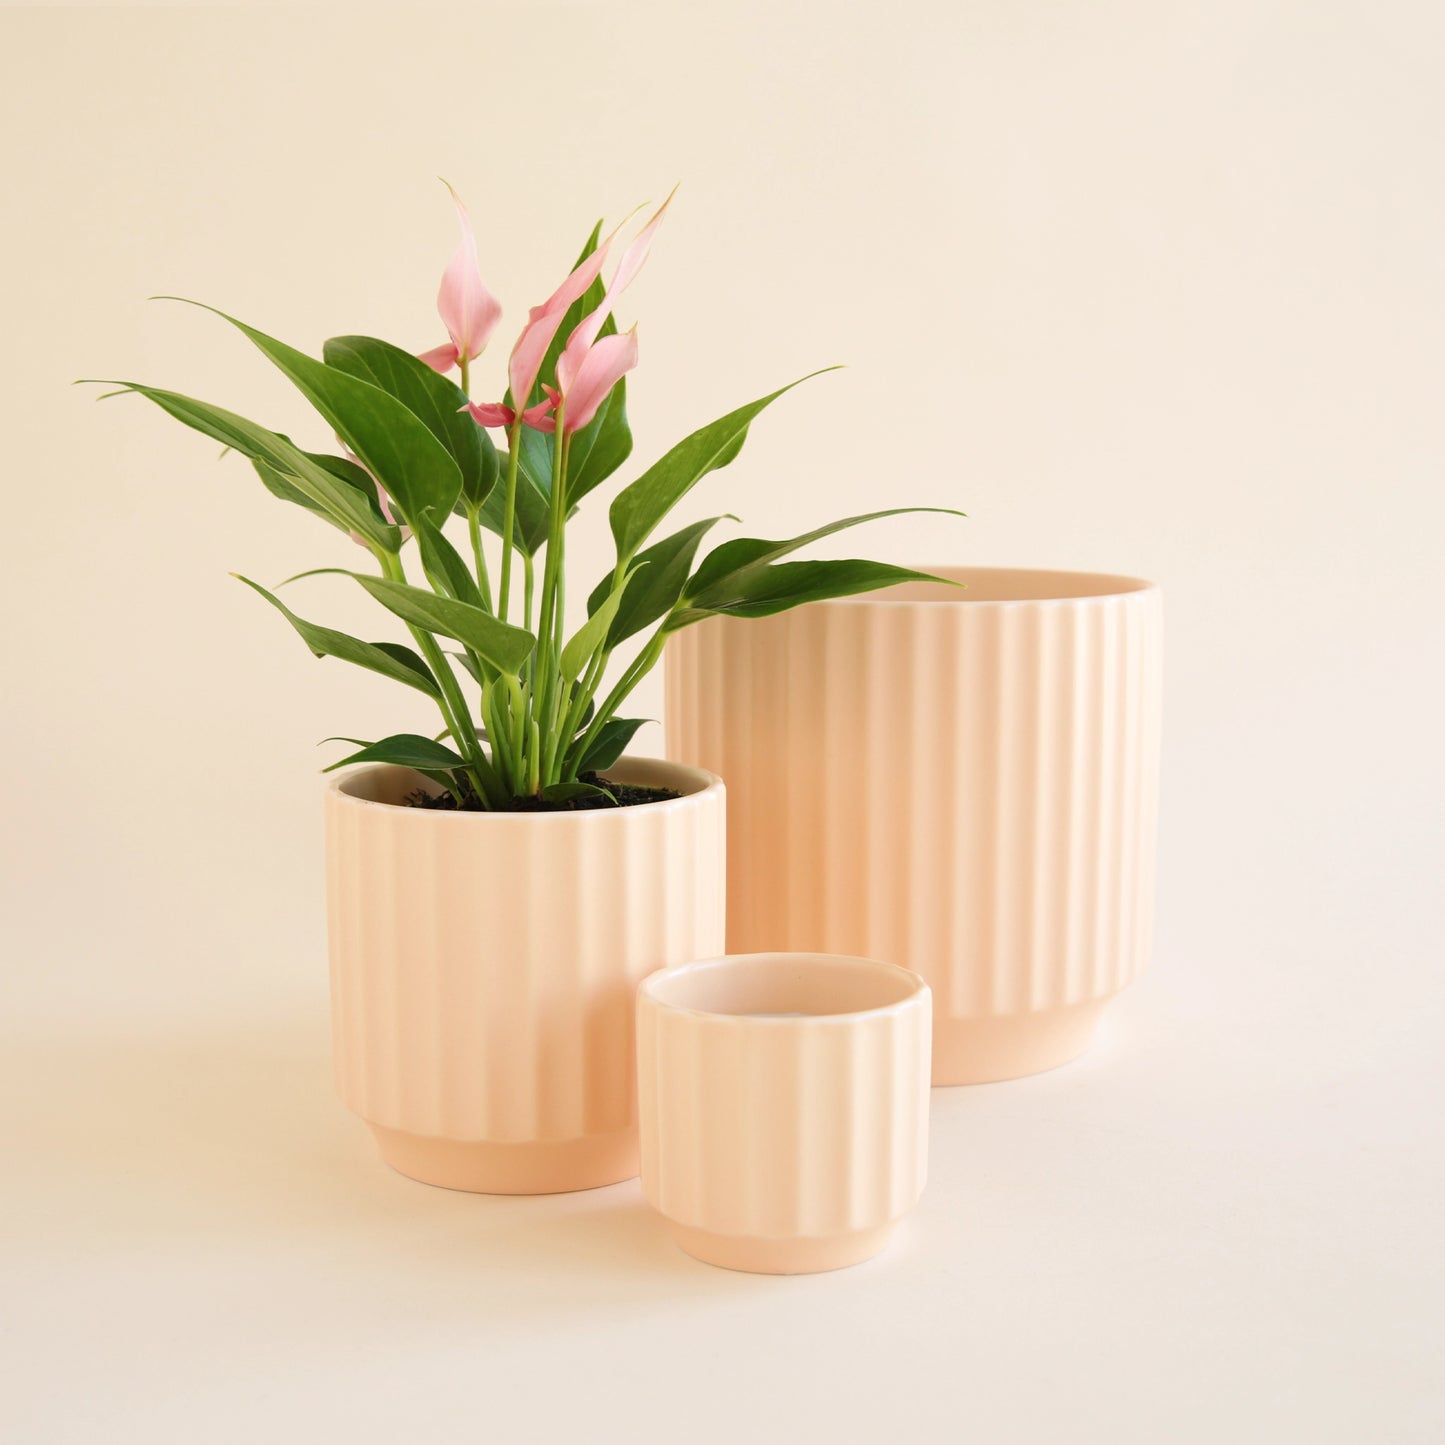 On a white background is three different sized ceramic pots with a fluted texture in a light pink shade. The medium pot is filled with an anthurium plant.